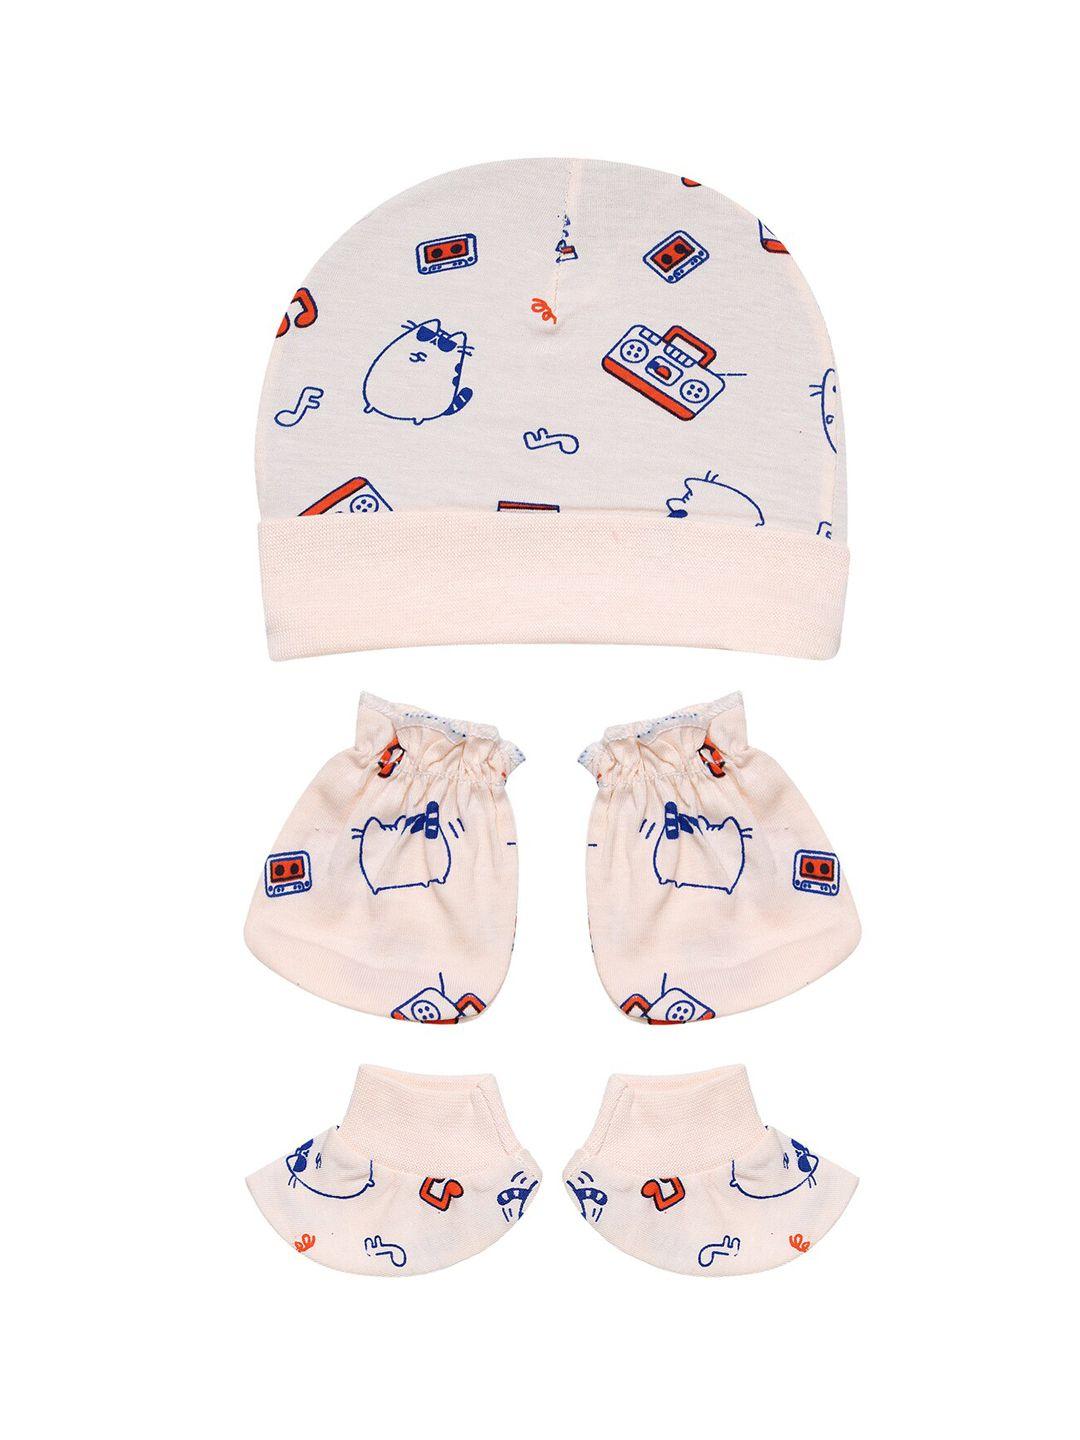 superminis infants peach printed caps, socks and mittens set